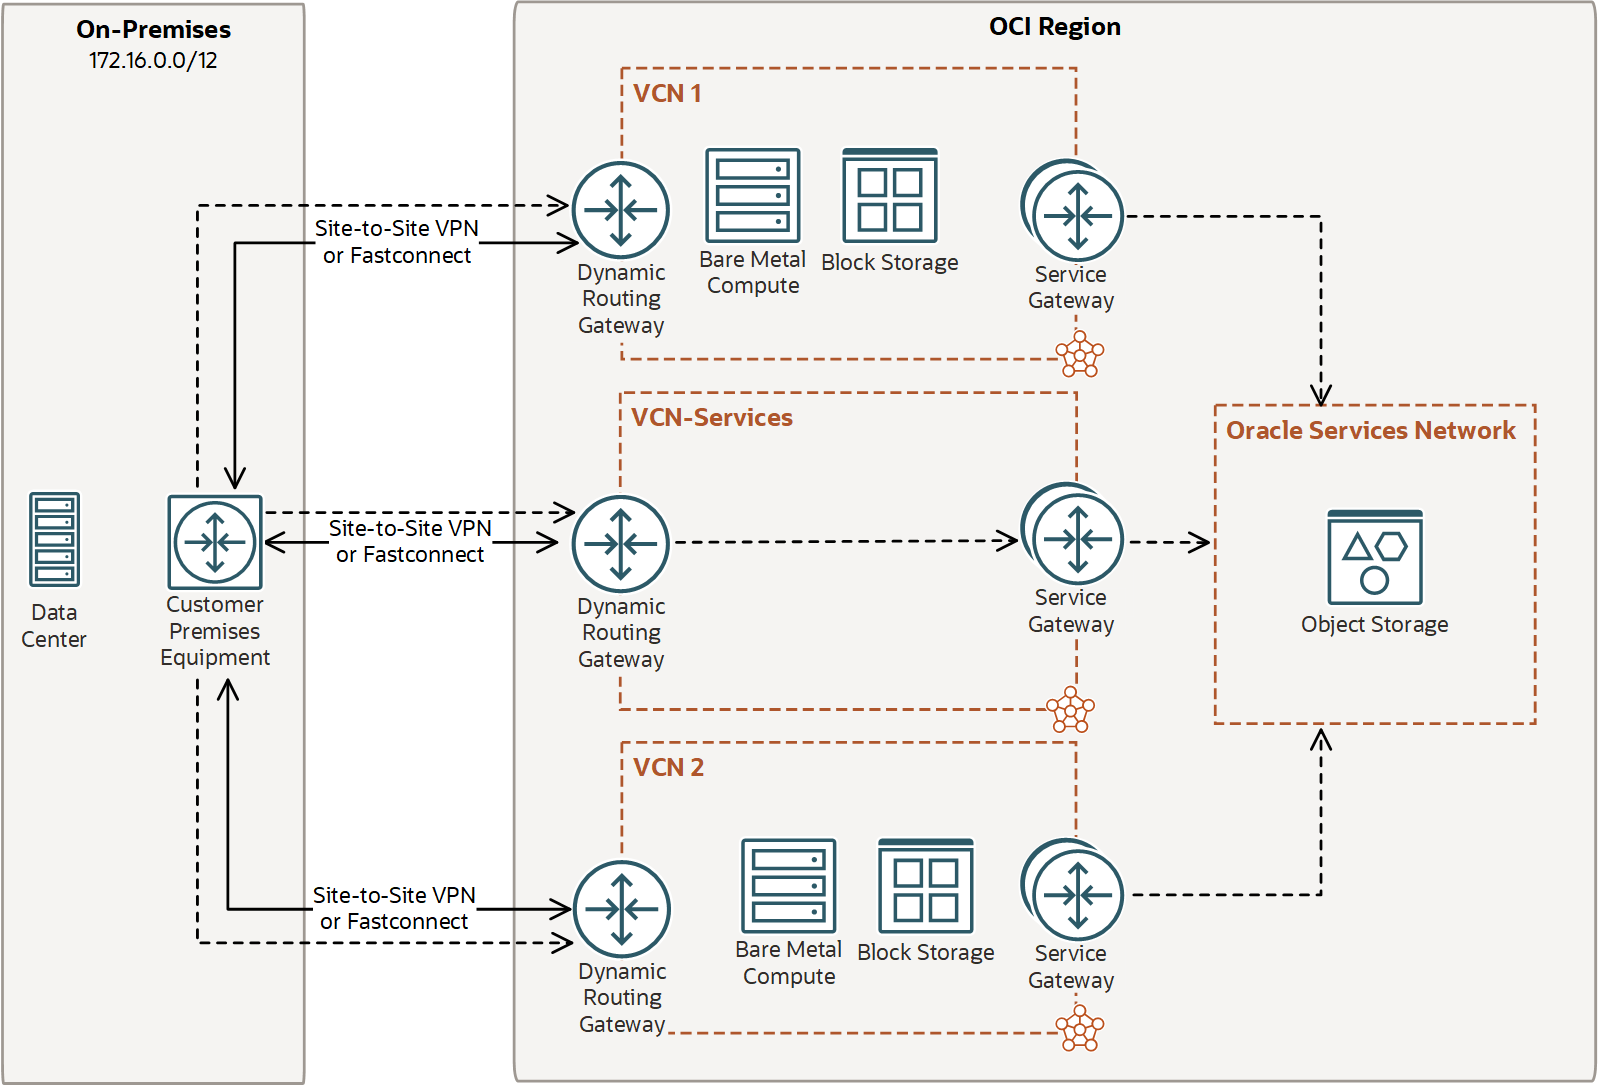 This image shows the on-premises network connected to multiple DRGs.